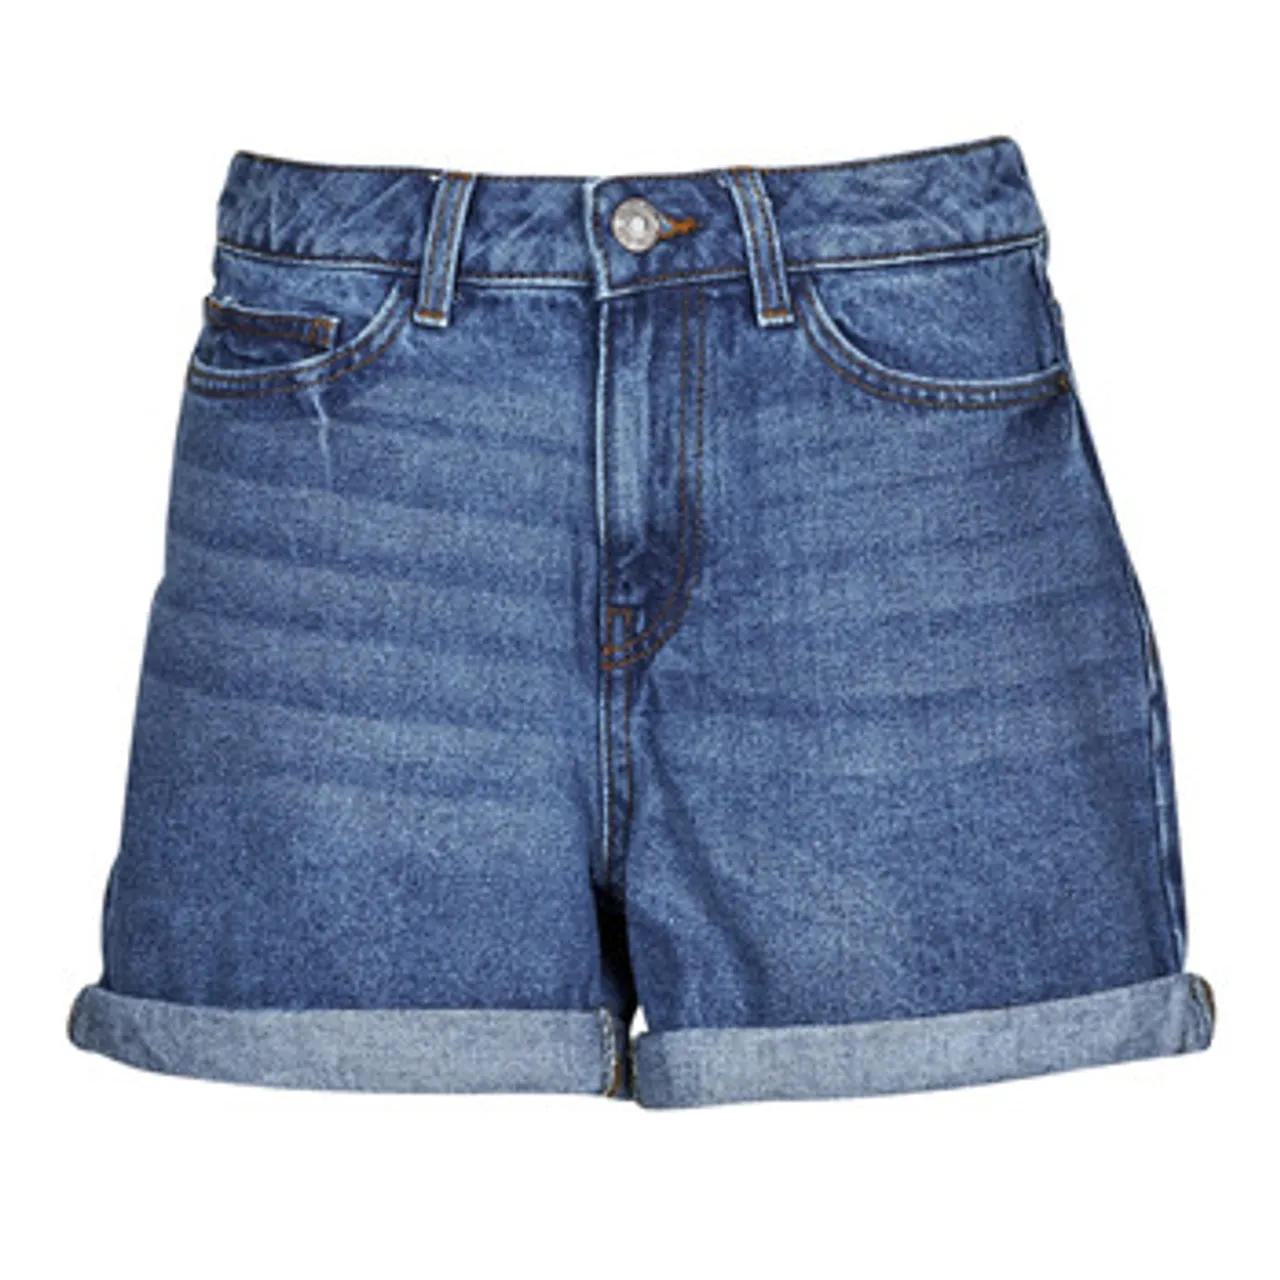 Noisy May  NMSMILEY  NW  SHORTS VI060MB NOOS  women's Shorts in Blue